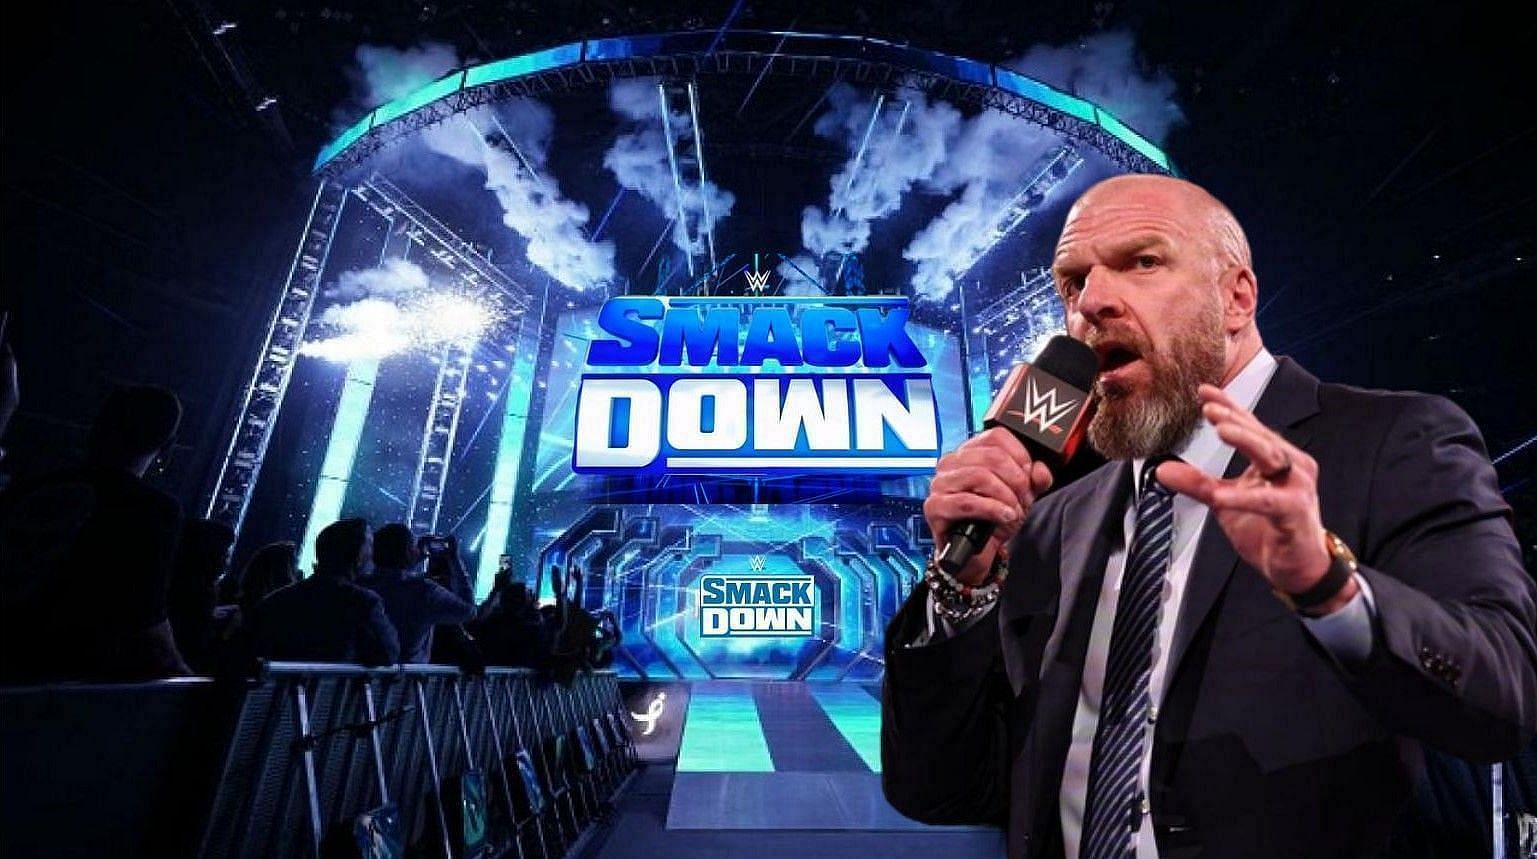 WWE has announced Triple H for SmackDown tonight